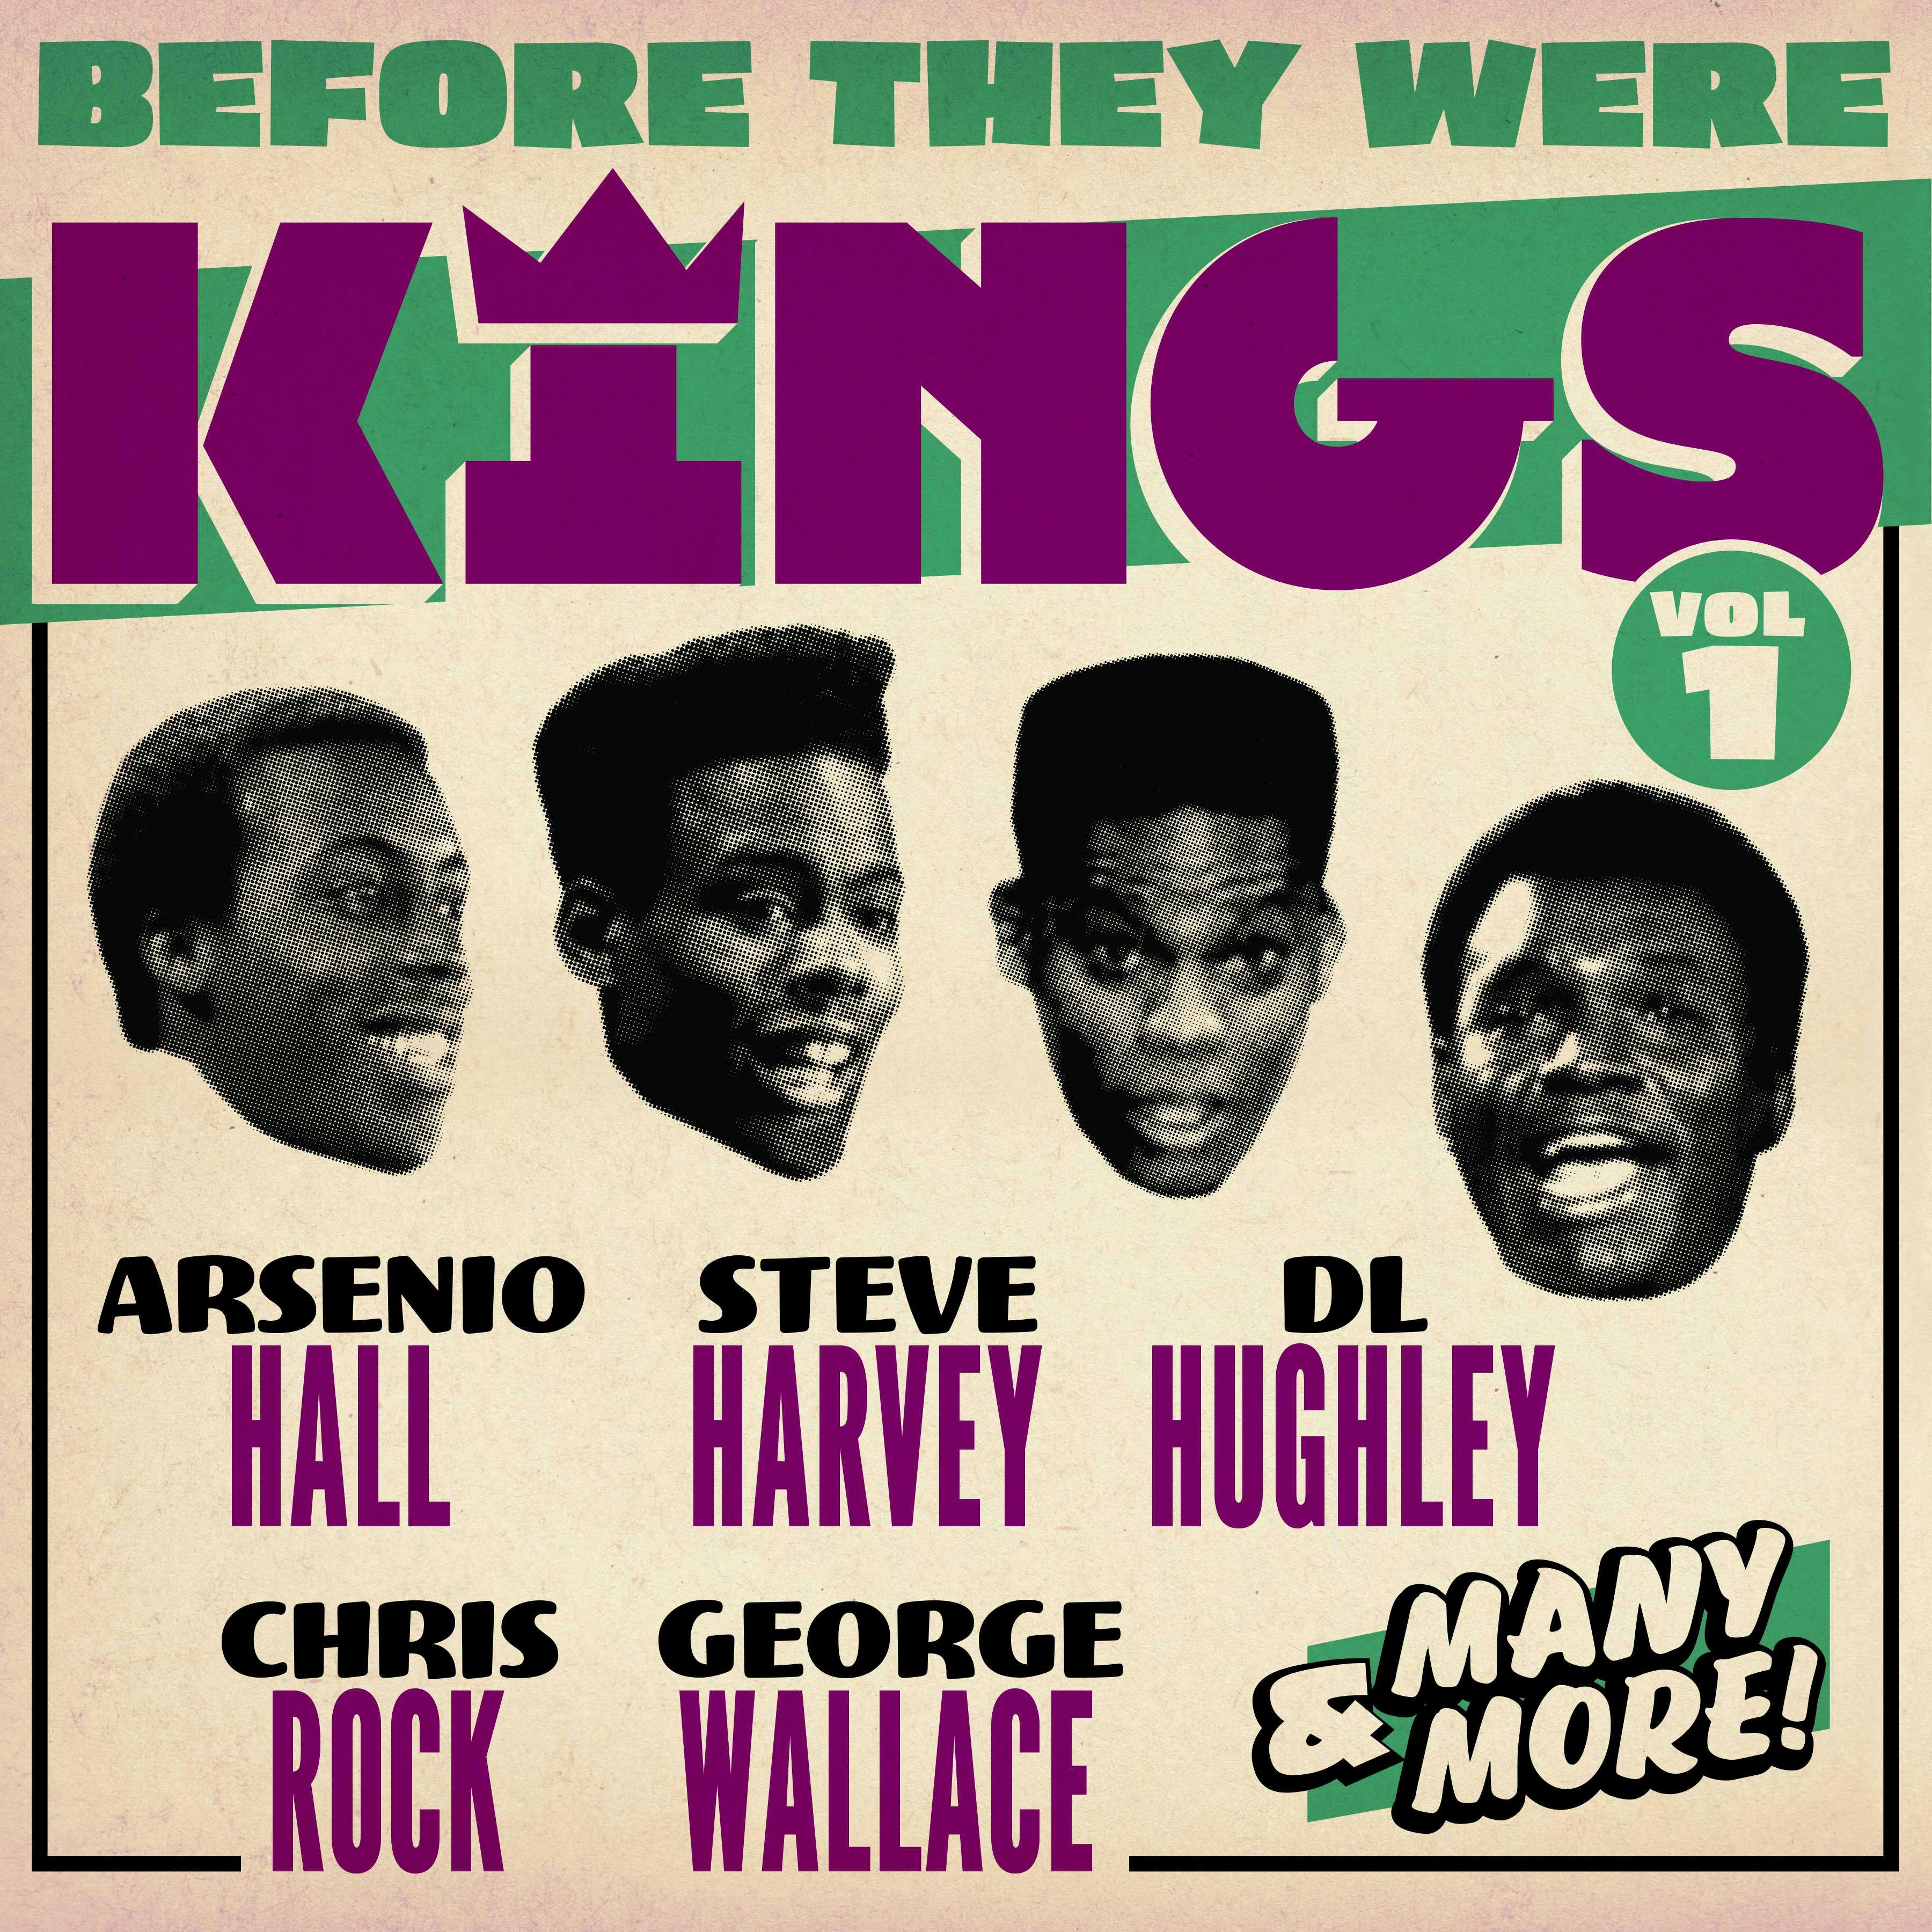 Before They Were Kings Vol 1 - undefined